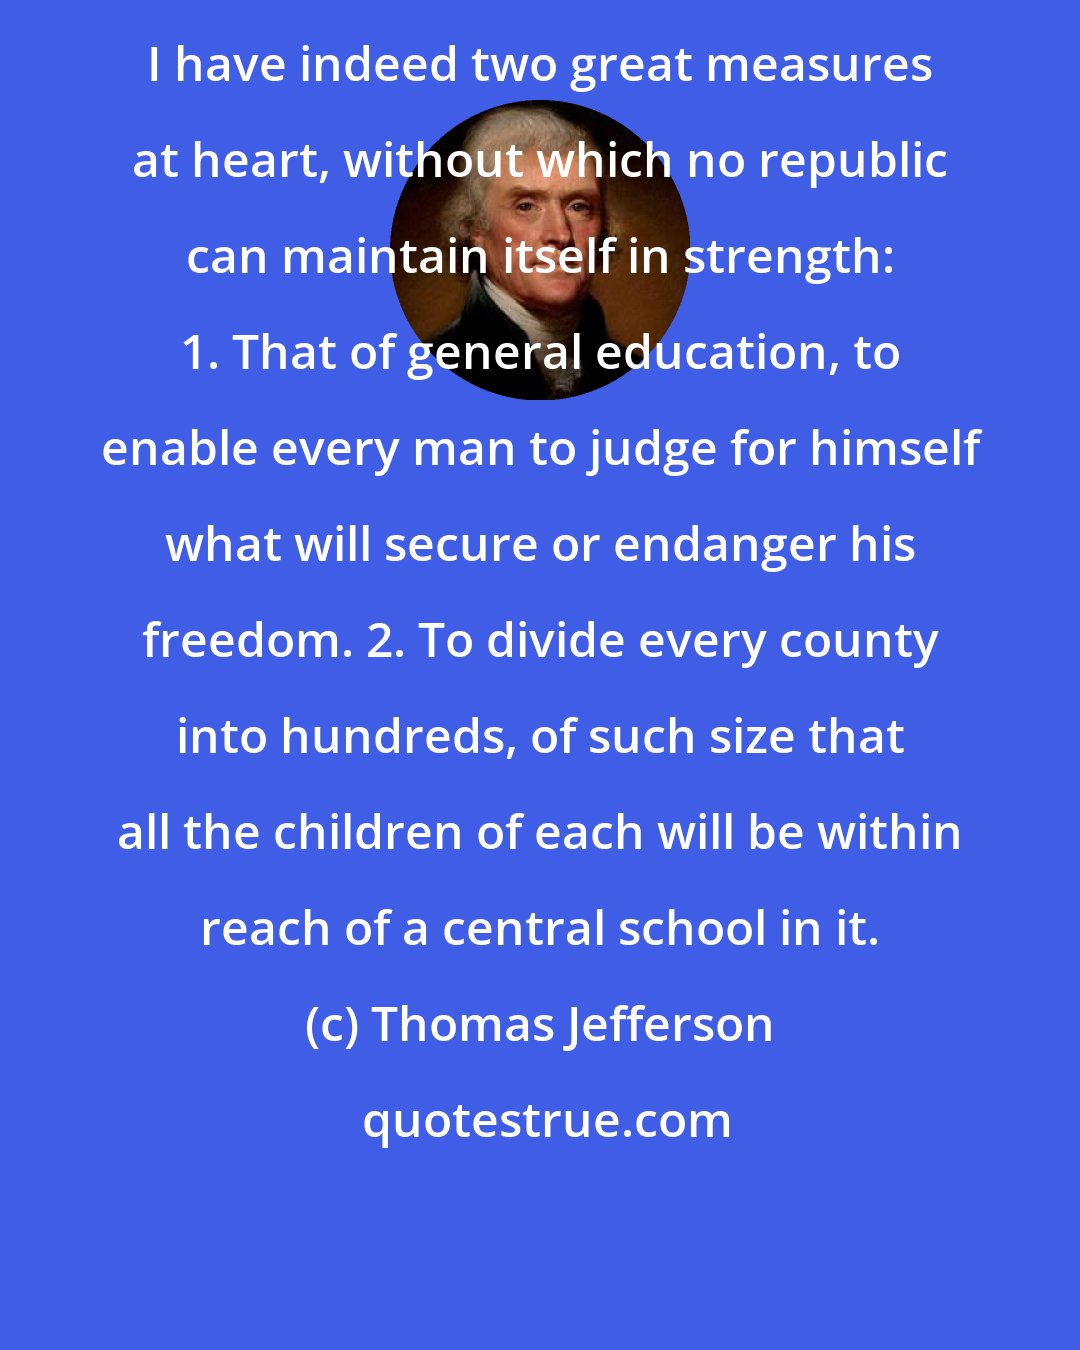 Thomas Jefferson: I have indeed two great measures at heart, without which no republic can maintain itself in strength: 1. That of general education, to enable every man to judge for himself what will secure or endanger his freedom. 2. To divide every county into hundreds, of such size that all the children of each will be within reach of a central school in it.